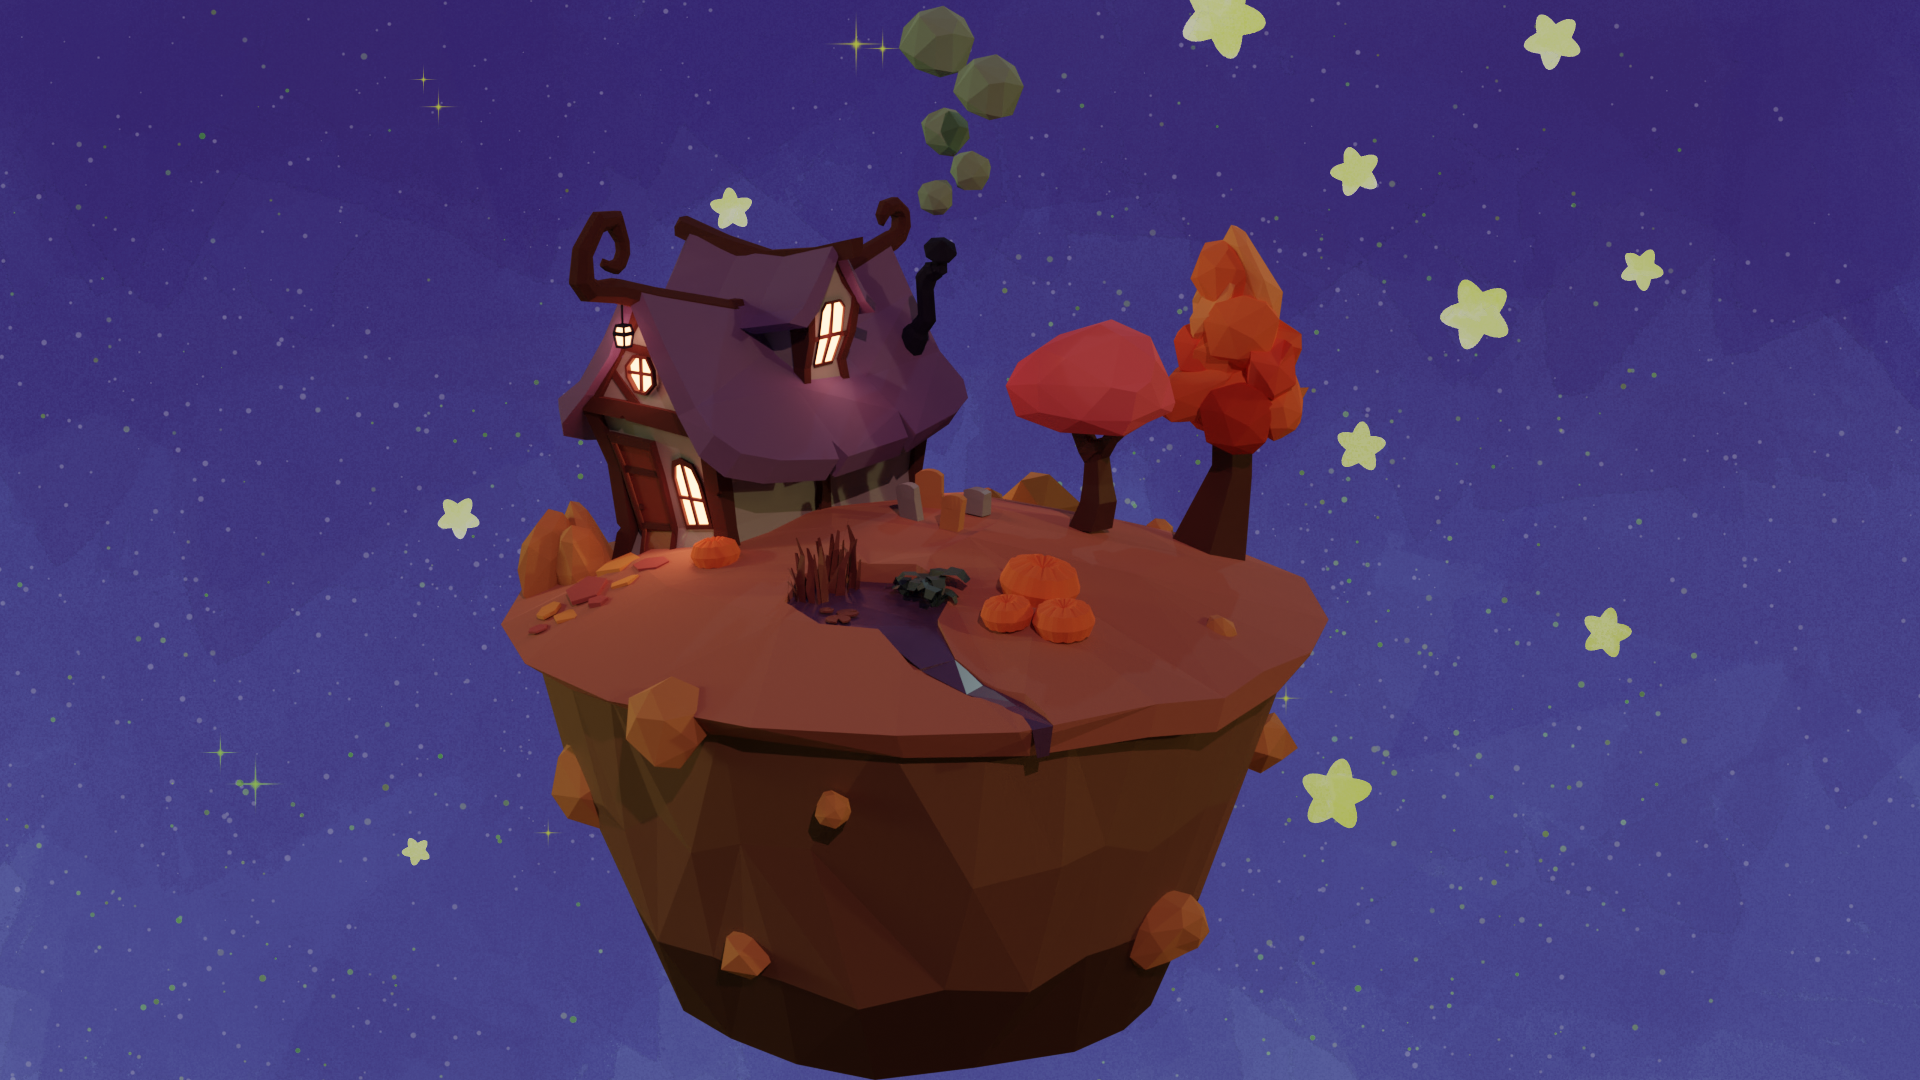 A cute little witch house on a floating island.